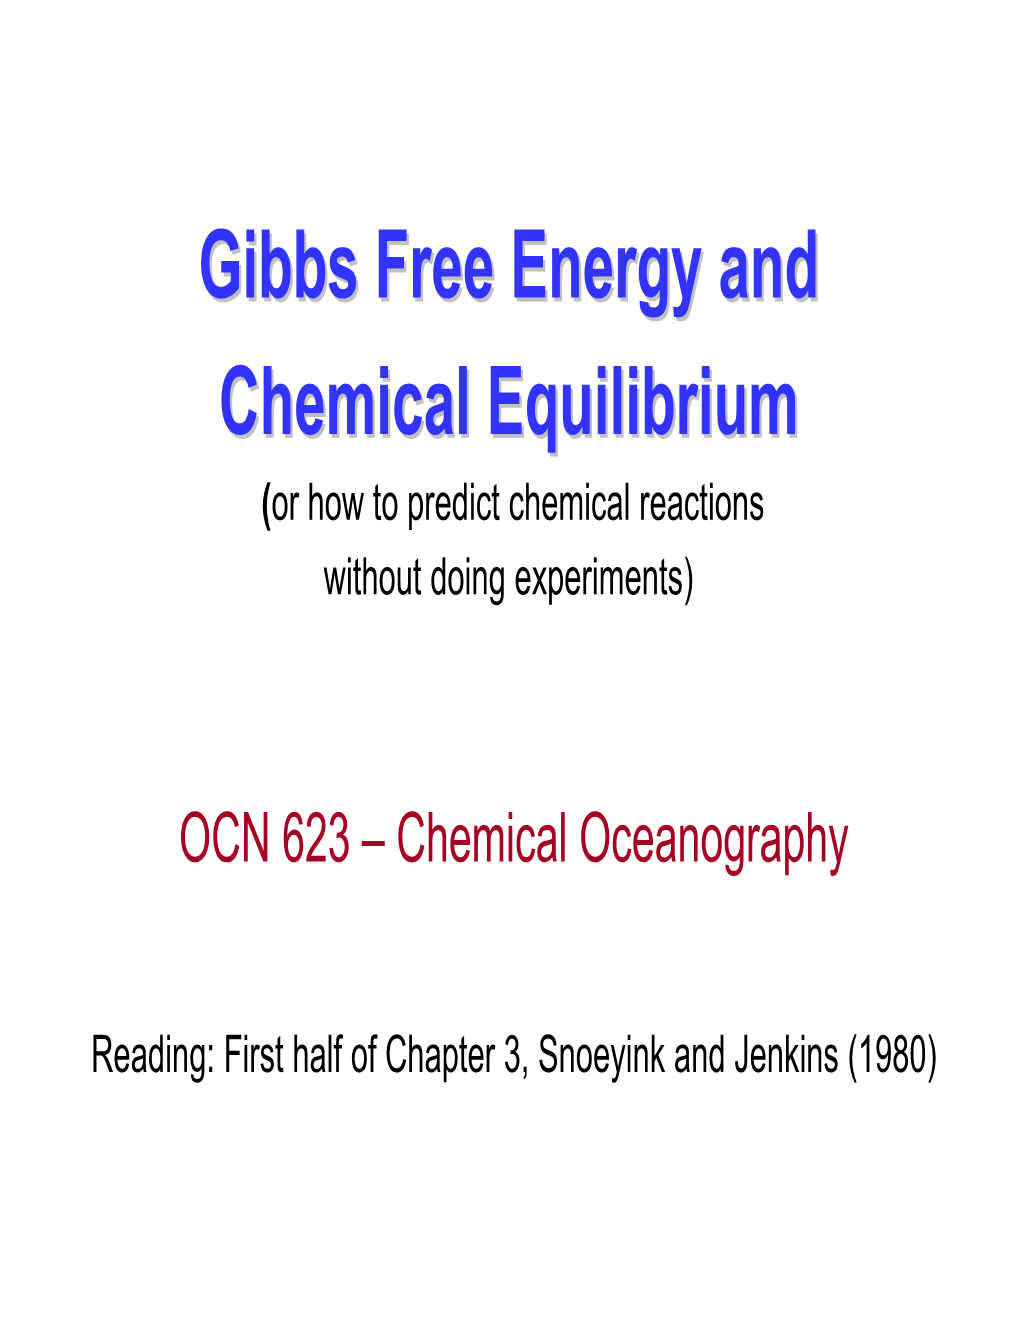 Gibbs Free Energy and Chemical Equilibrium